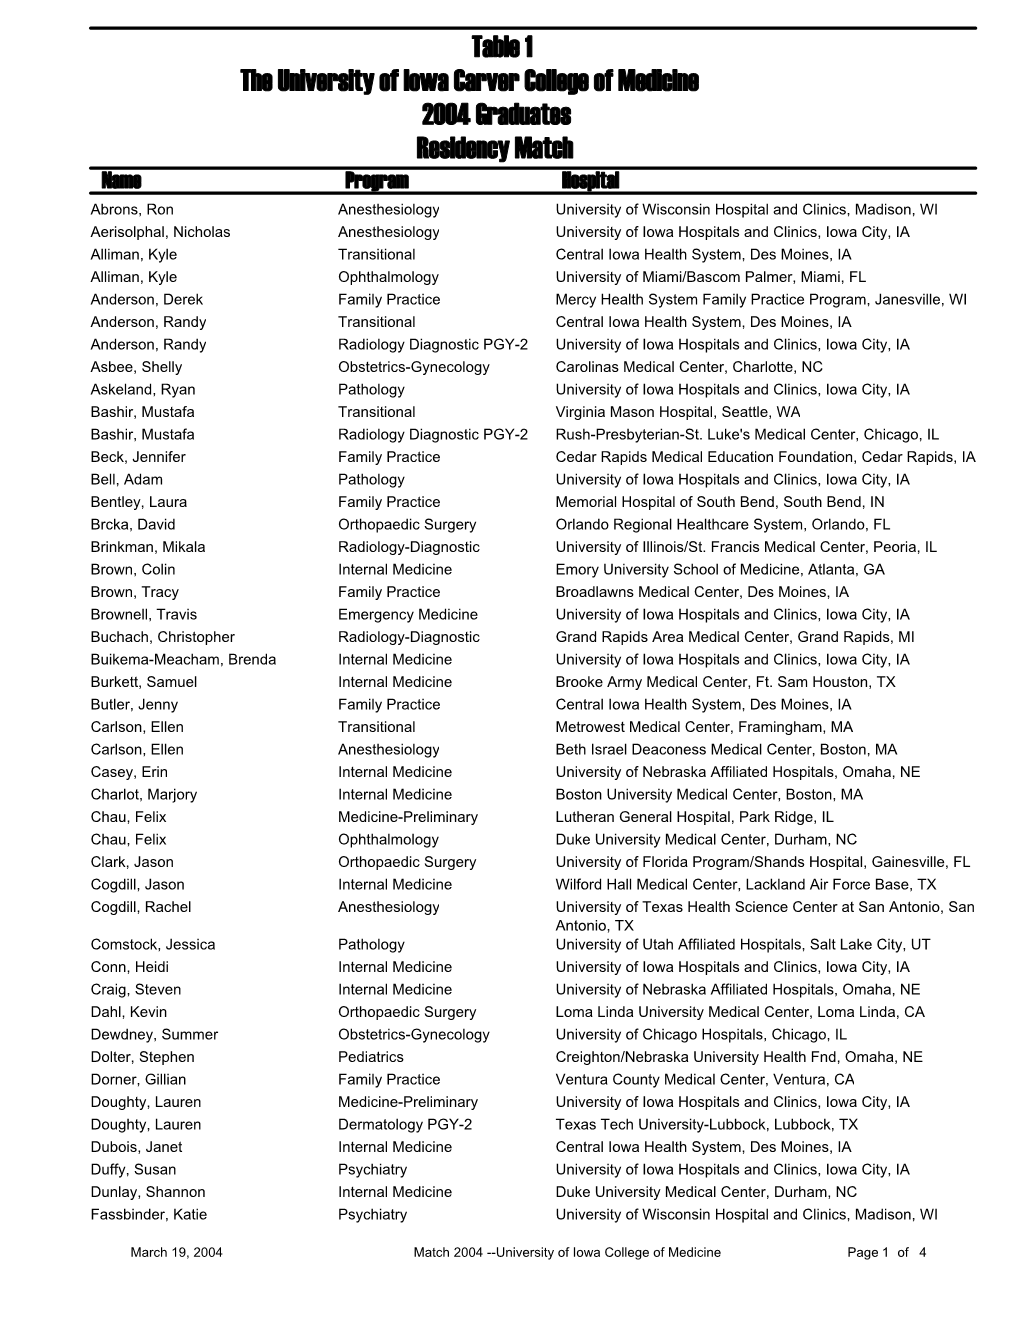 2004 Match Results by Name.Pdf